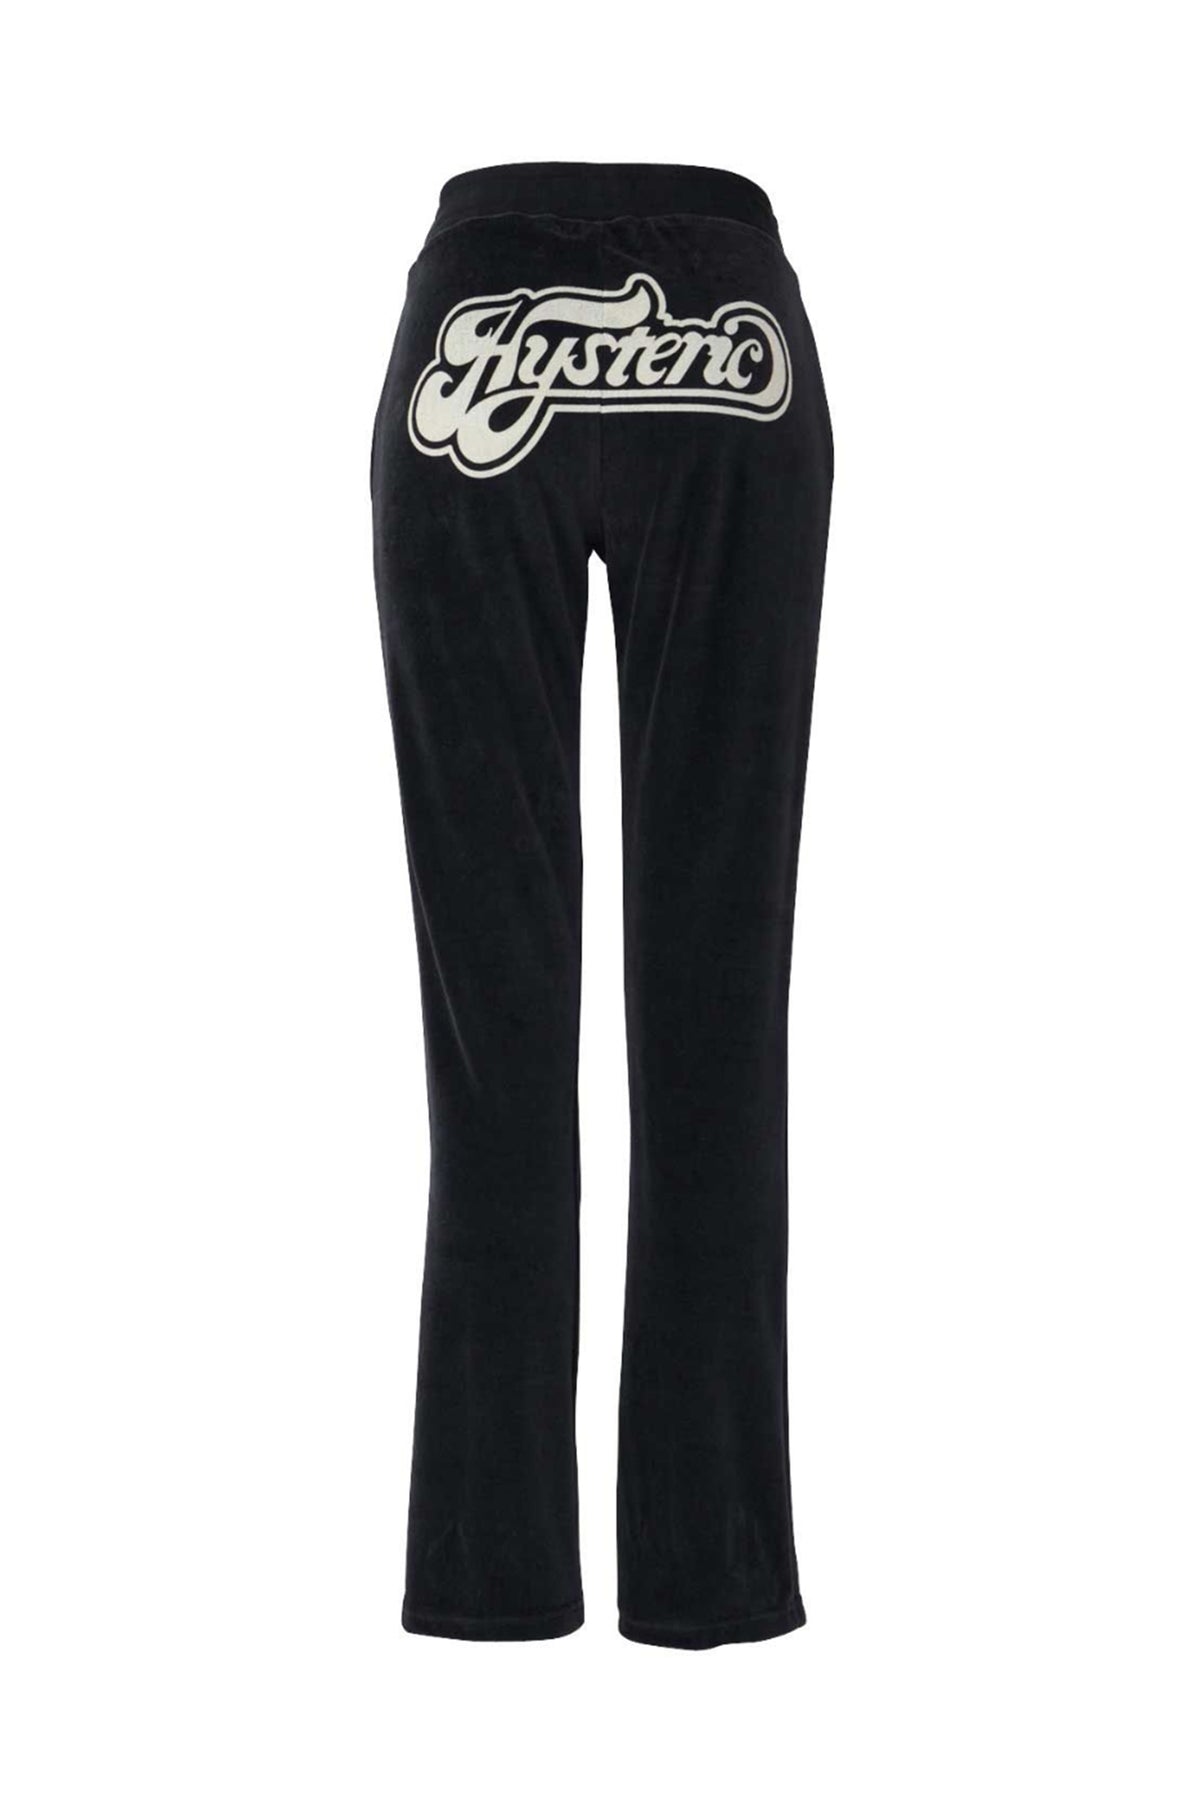 HYSTERIC GLAMOUR CREAMY LOGO FLARE TRACK PANTS / BLK